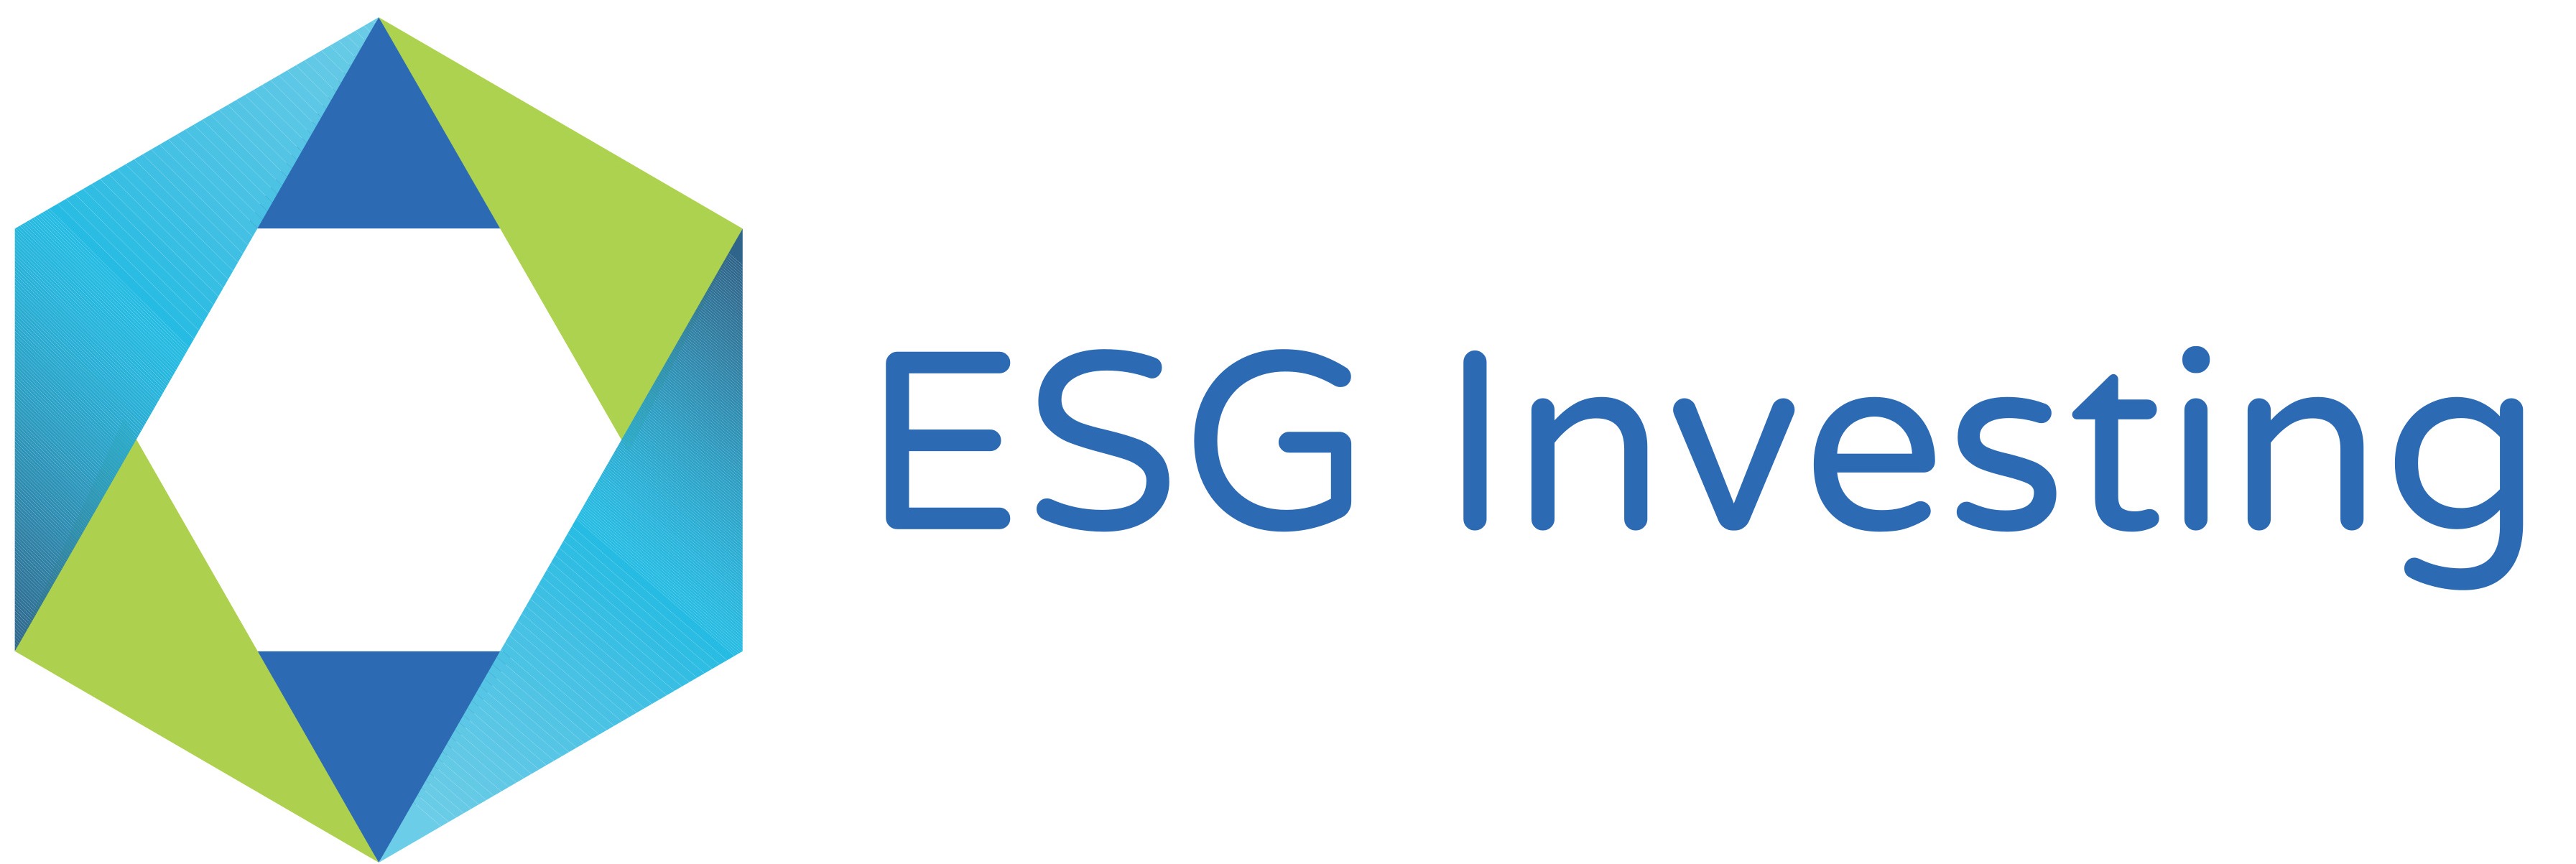 ESG Investing: Sustainability News, Events & Awards